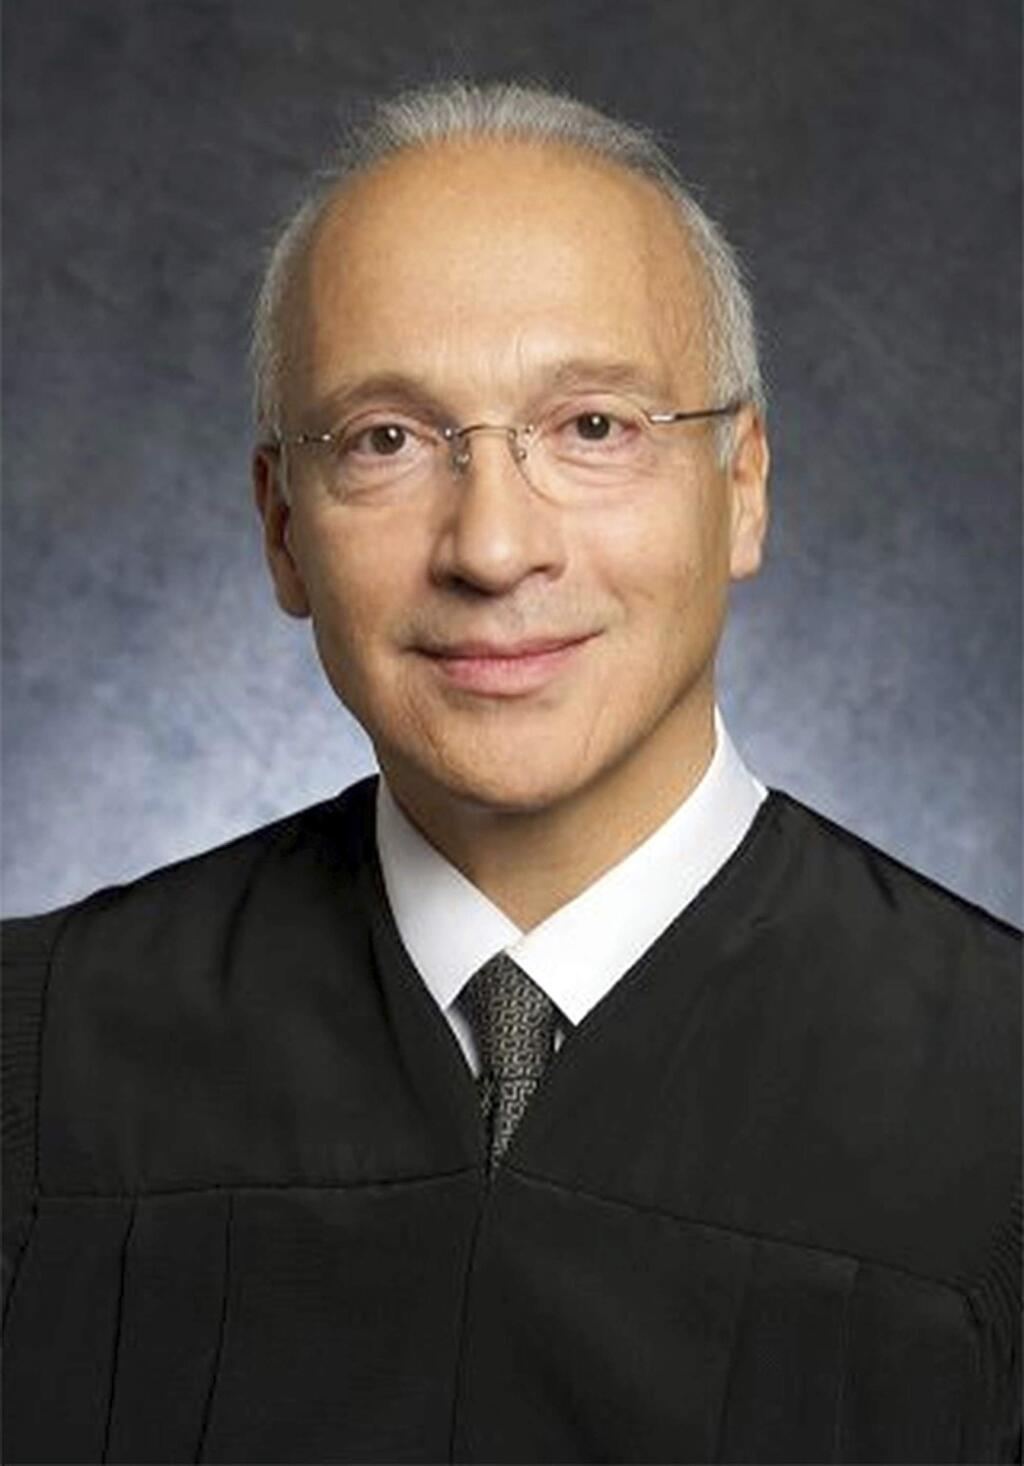 FILE - This undated file photo provided by the U.S. District Court shows Judge Gonzalo Curiel. Lawyers for a Mexican man who was shielded from being deported will try to persuade Curiel, who has been a target of President Donald Trump's scorn, that the administration wrongly expelled their client from the United States. Juan Manuel Montes, 23, is the first known recipient of the five-year-old Deferred Action for Childhood Arrivals program to be deported under Trump. Curiel will hear arguments Tuesday, Aug. 22, 2017. (U.S. District Court via AP, File)